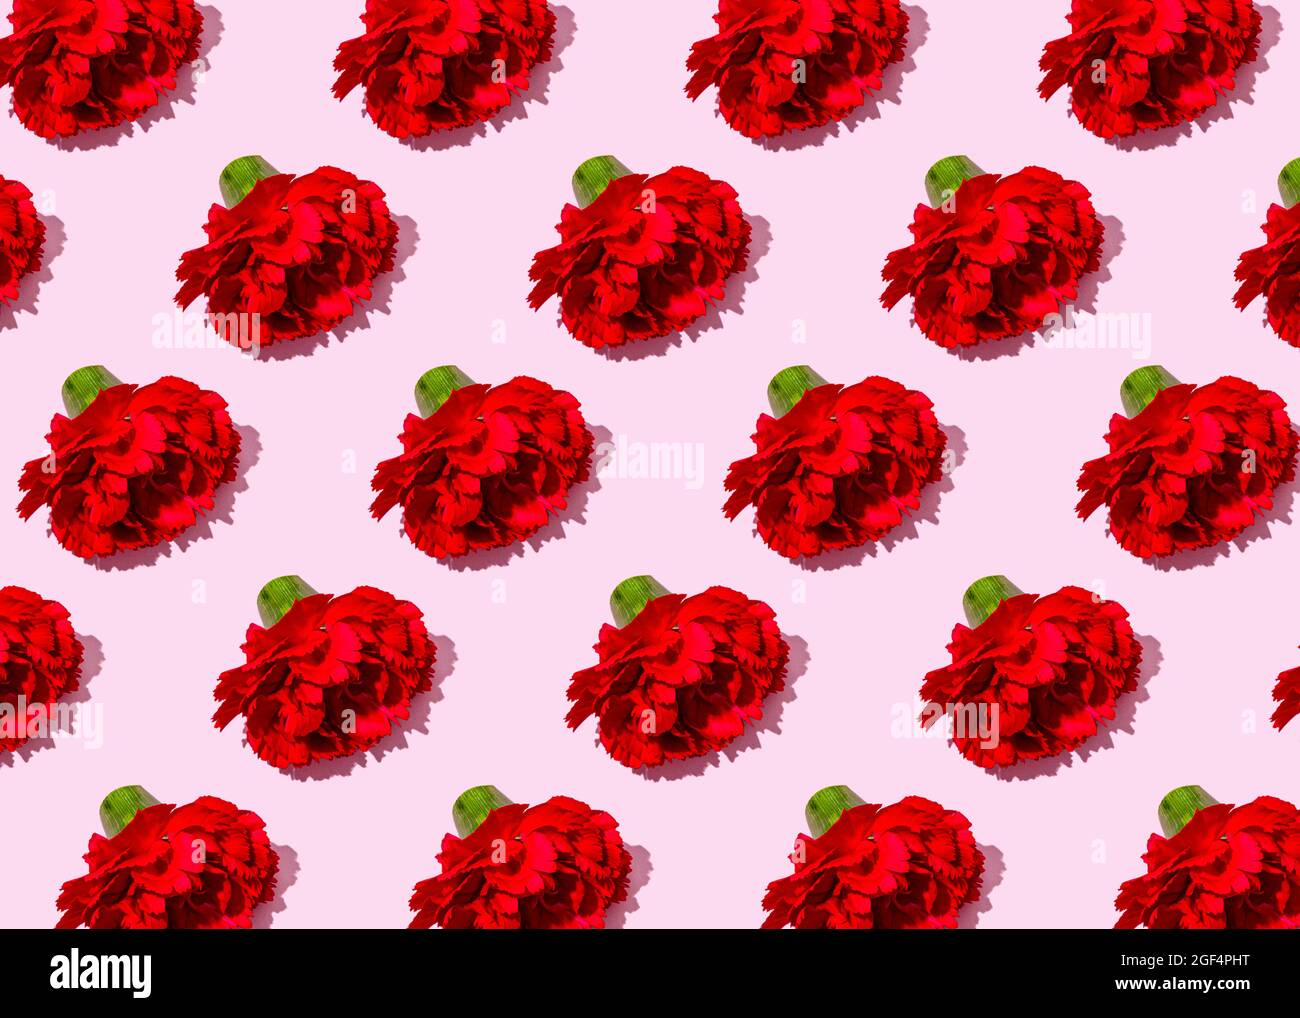 Pattern of heads of red carnation flowers flat laid against pink background Stock Photo